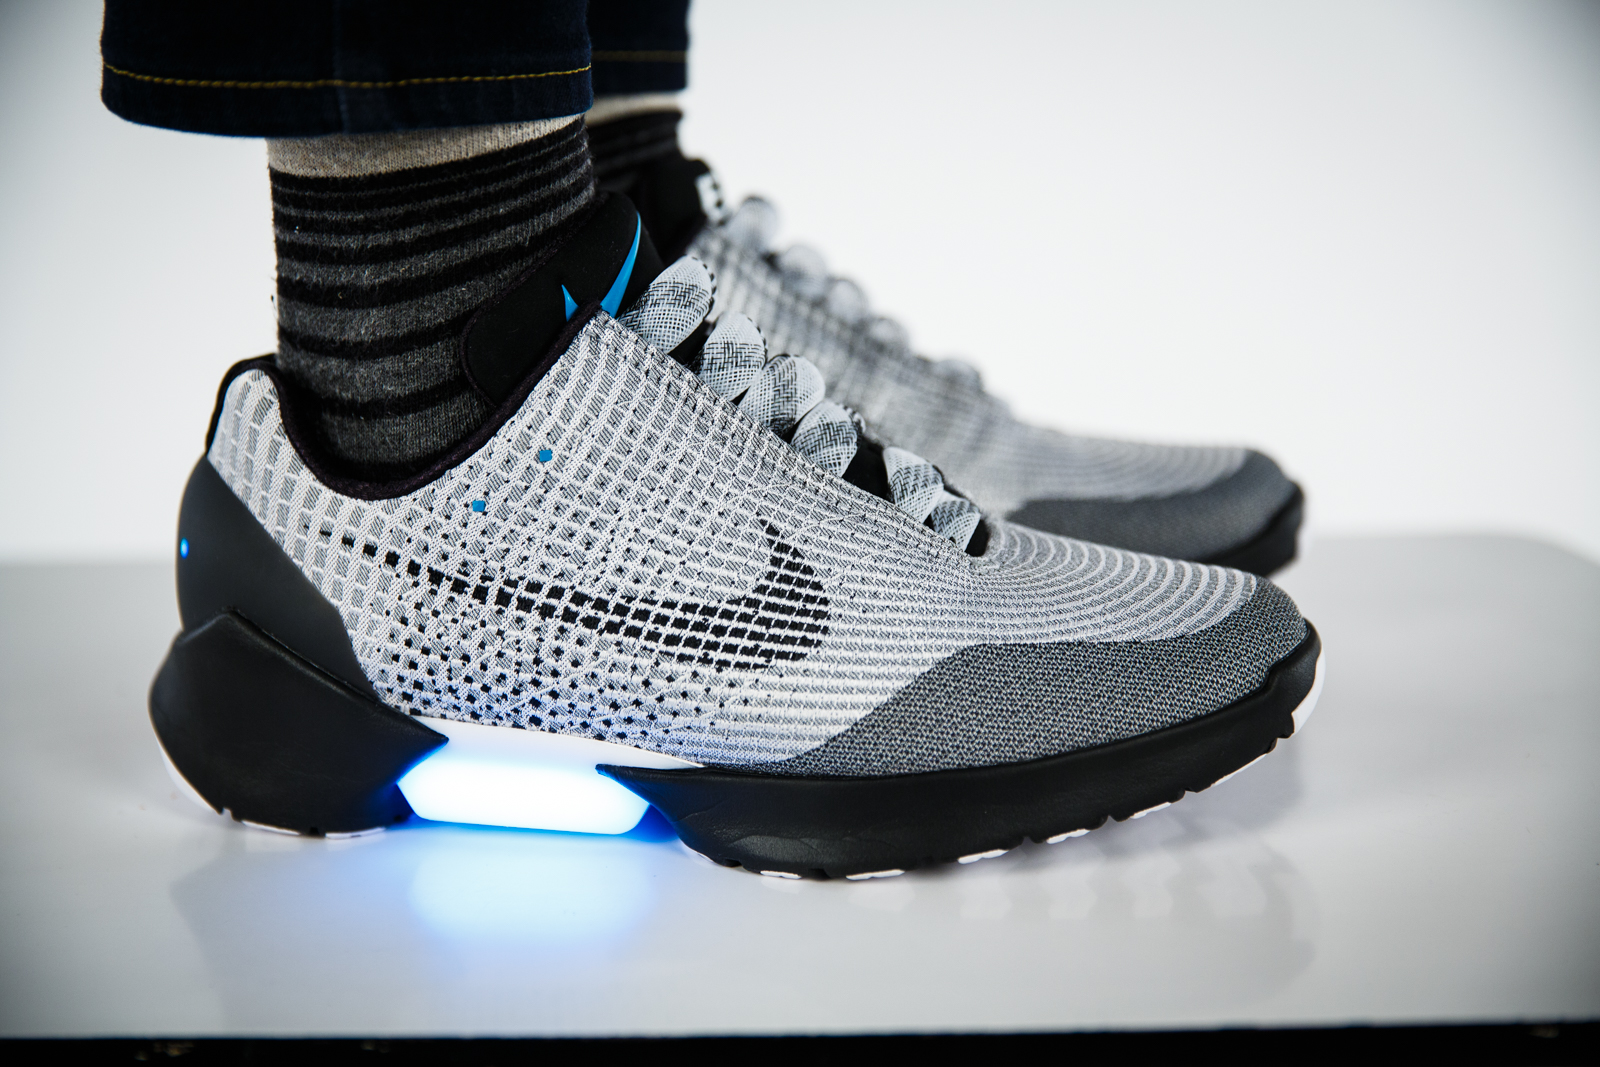 The Nike HyperAdapt 1.0: Not exactly what Back to the Future 2 promised, but close for now -